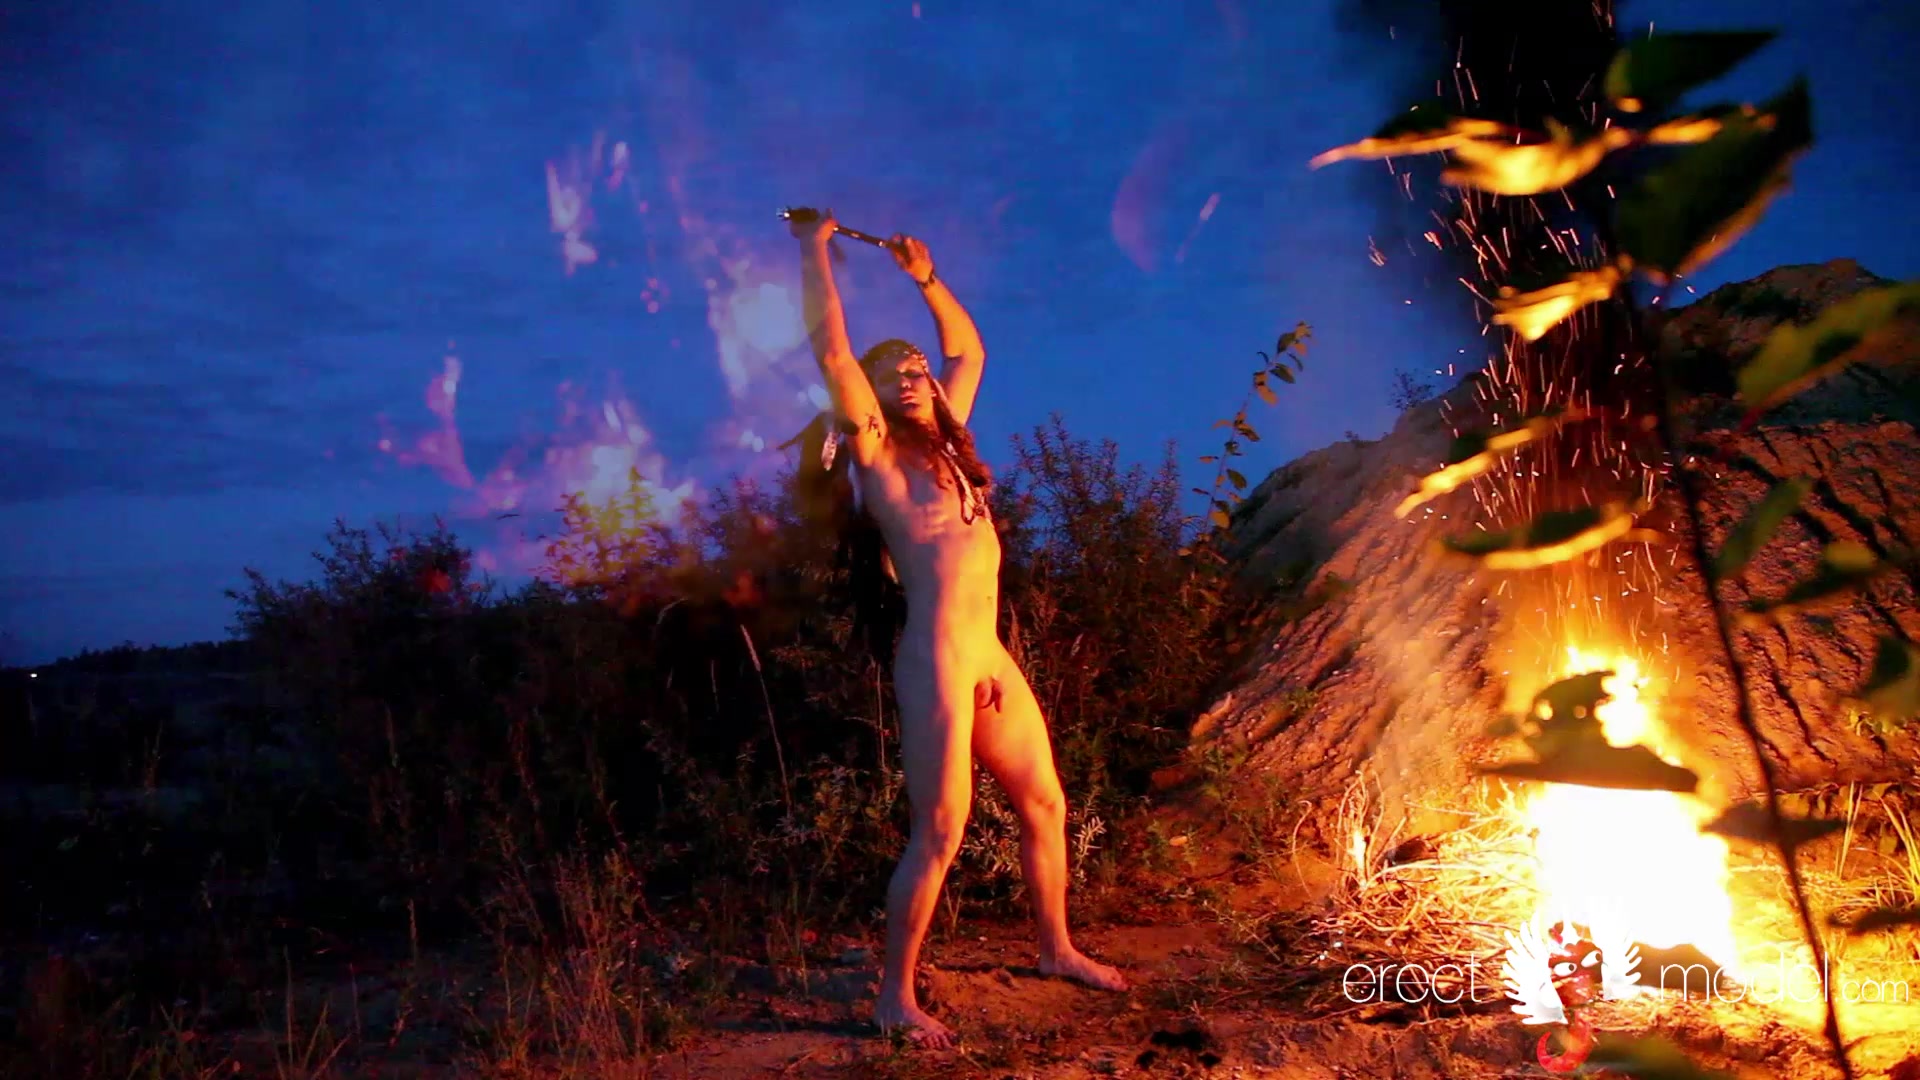 American indian nude and excited by his ritual dance